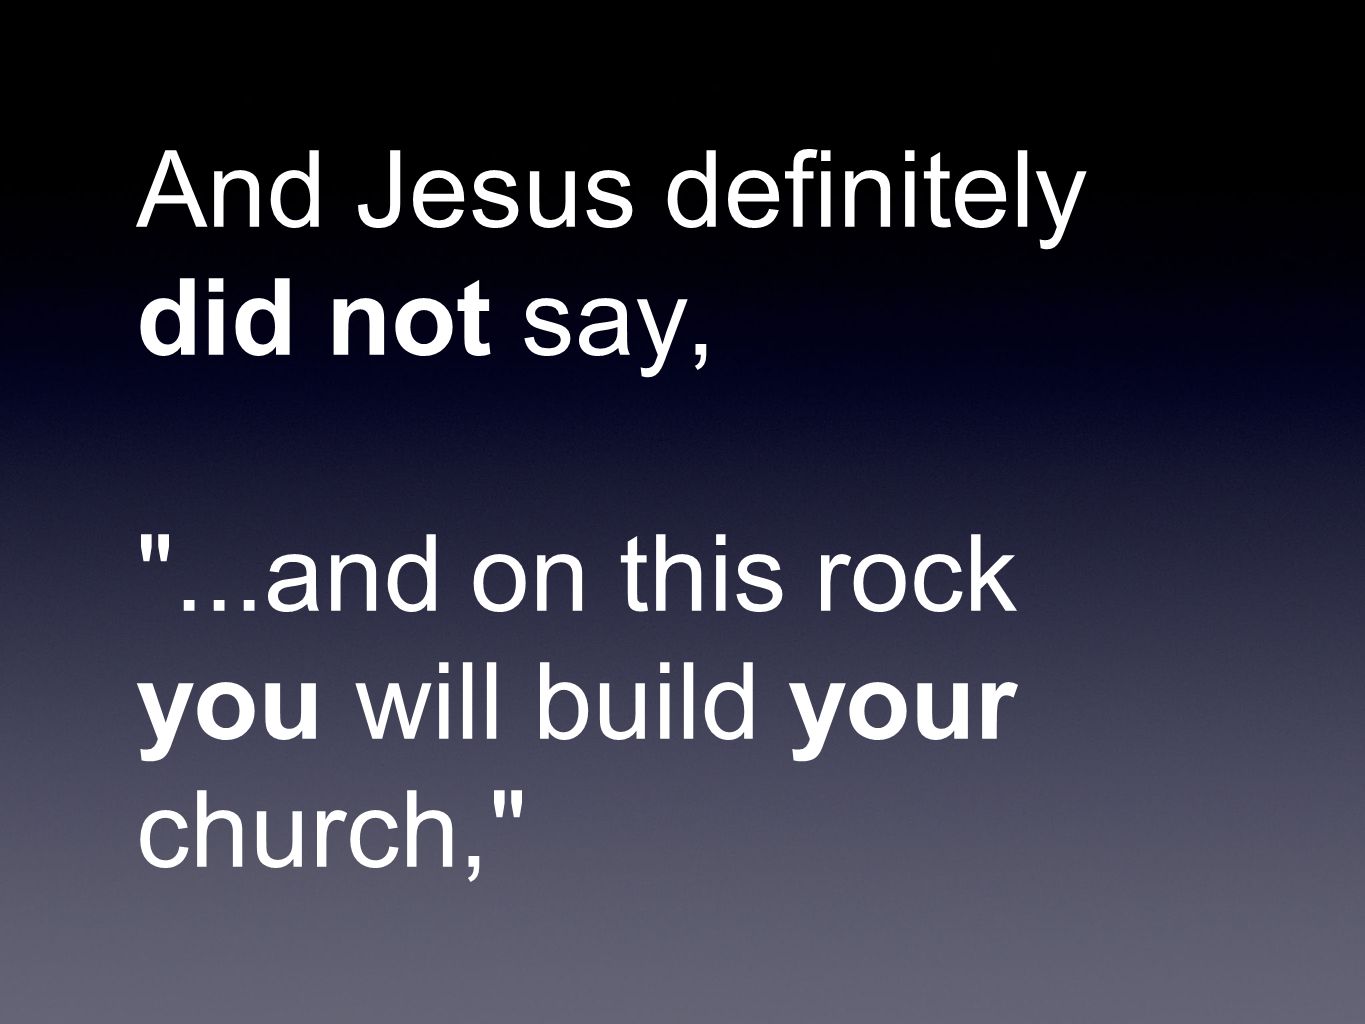 And Jesus definitely did not say, ...and on this rock you will build your church,